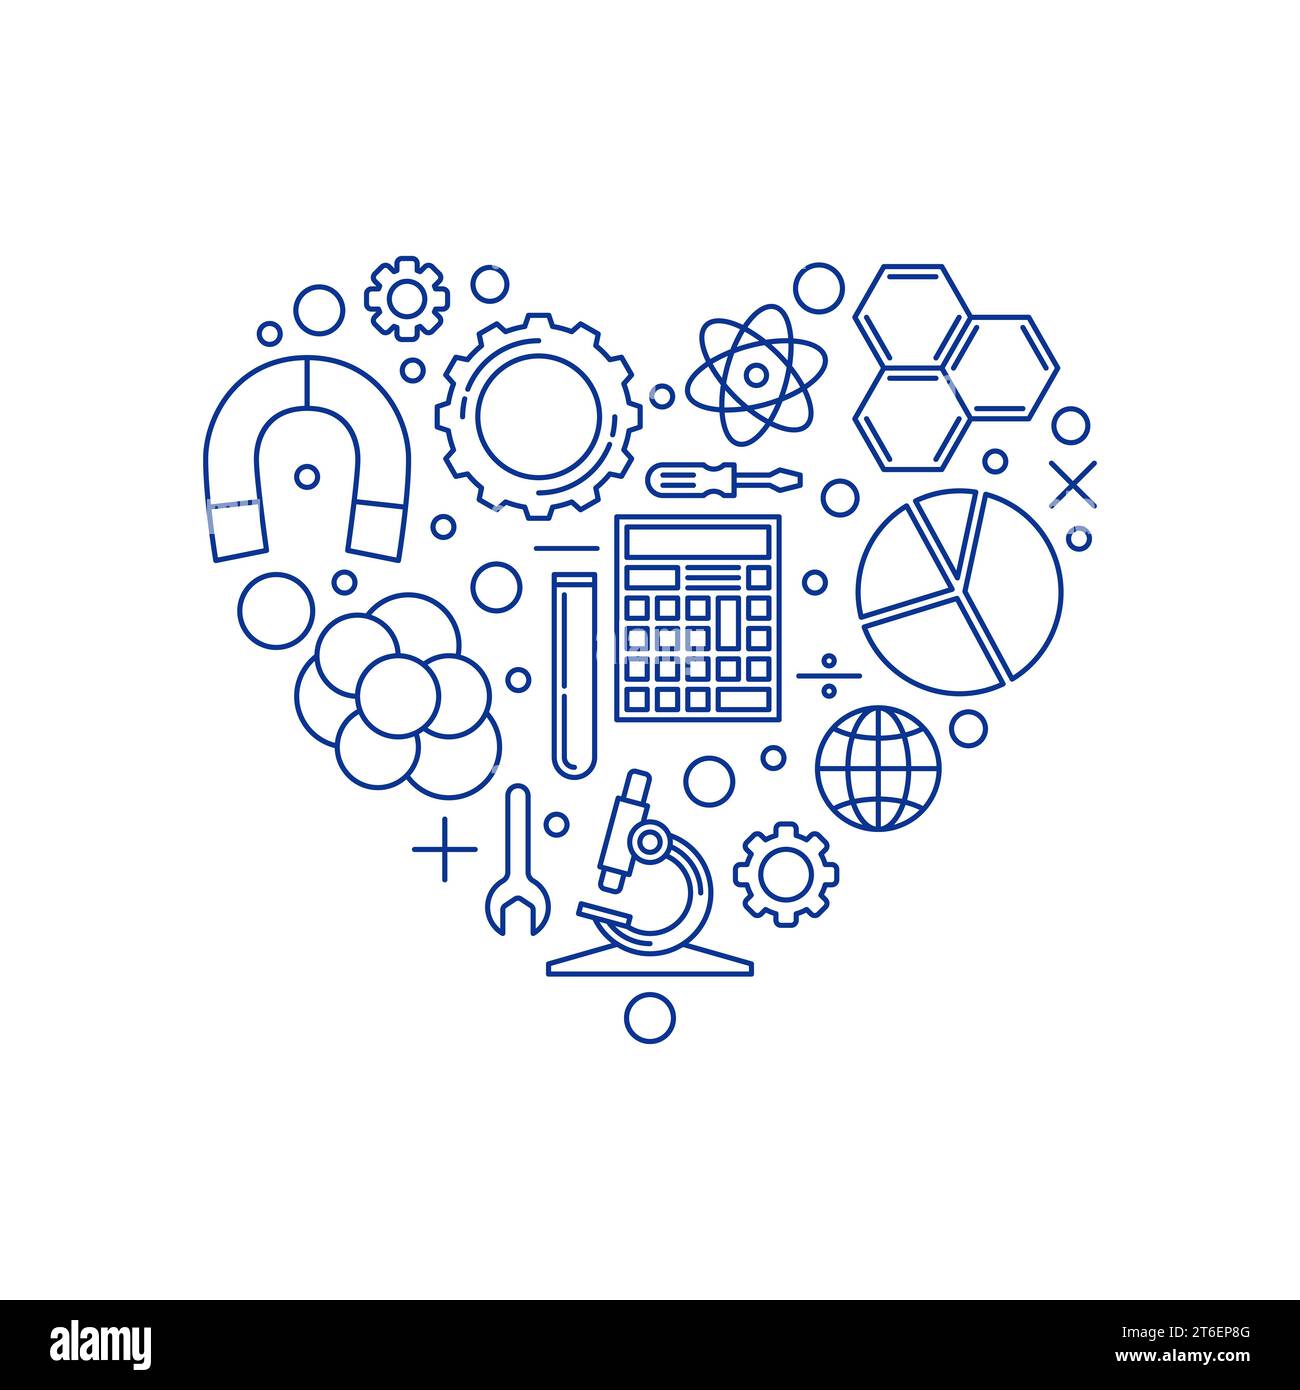 STEM Heart concept minimal banner - Science, Technology, Engineering and Mathematics Education vector heart-shaped illustration Stock Vector